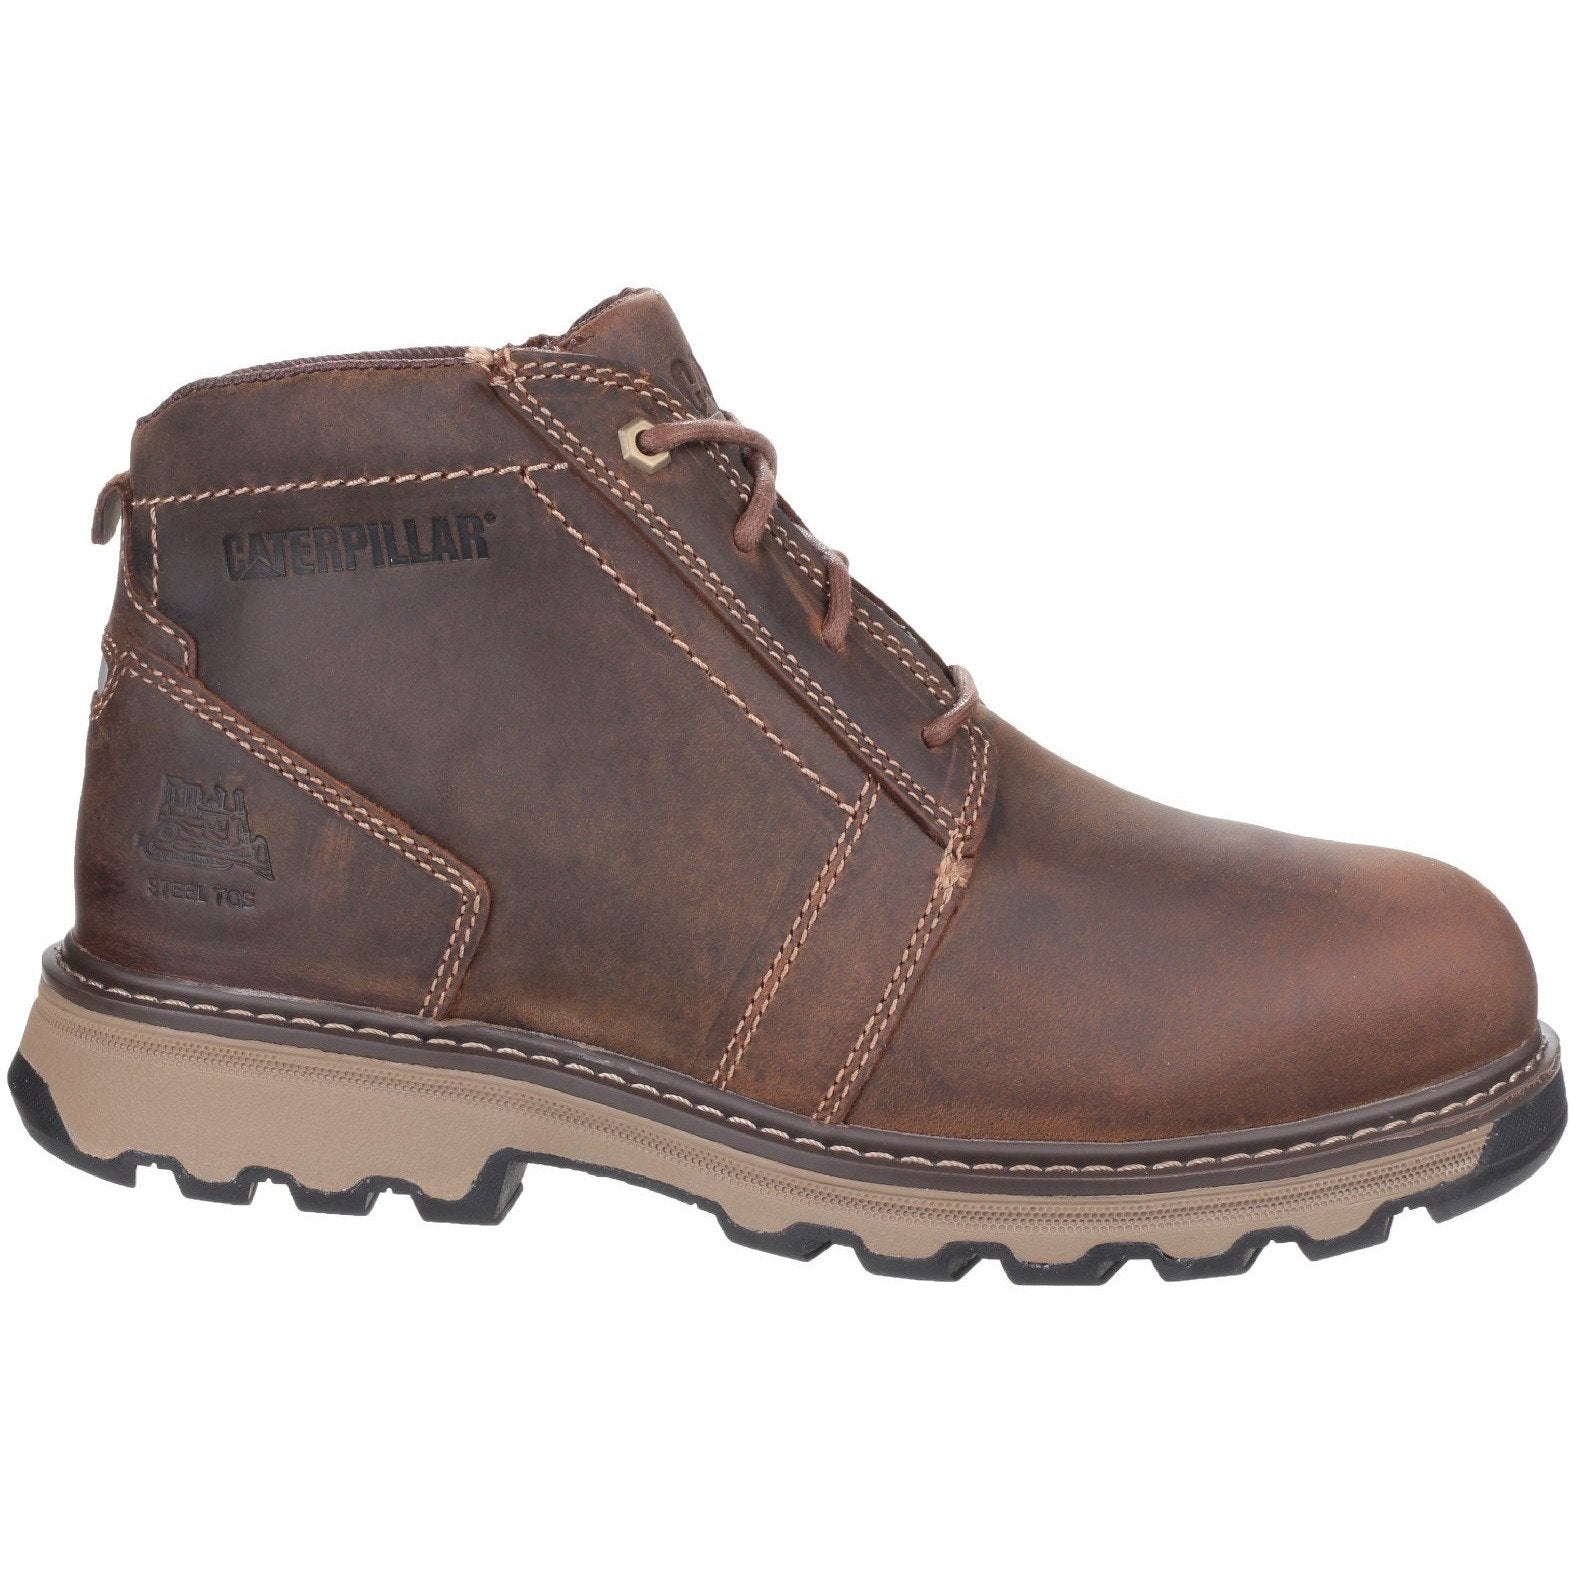 Caterpillar NEW Parker Wide-Fitting Mens Safety Boot | Steel Toe Cap ...